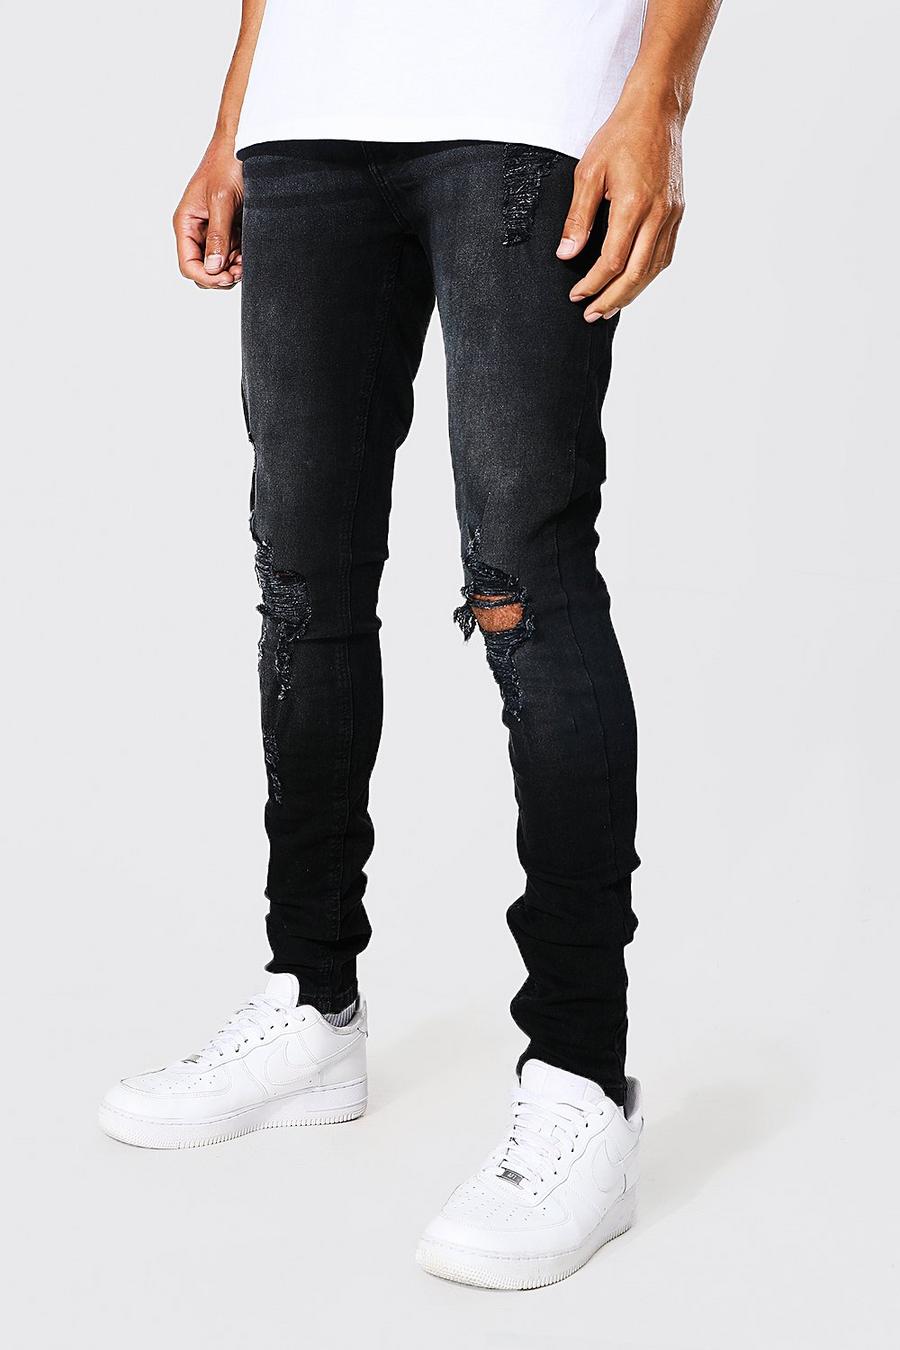 Washed black Tall Skinny Busted Knee Distressed Jean